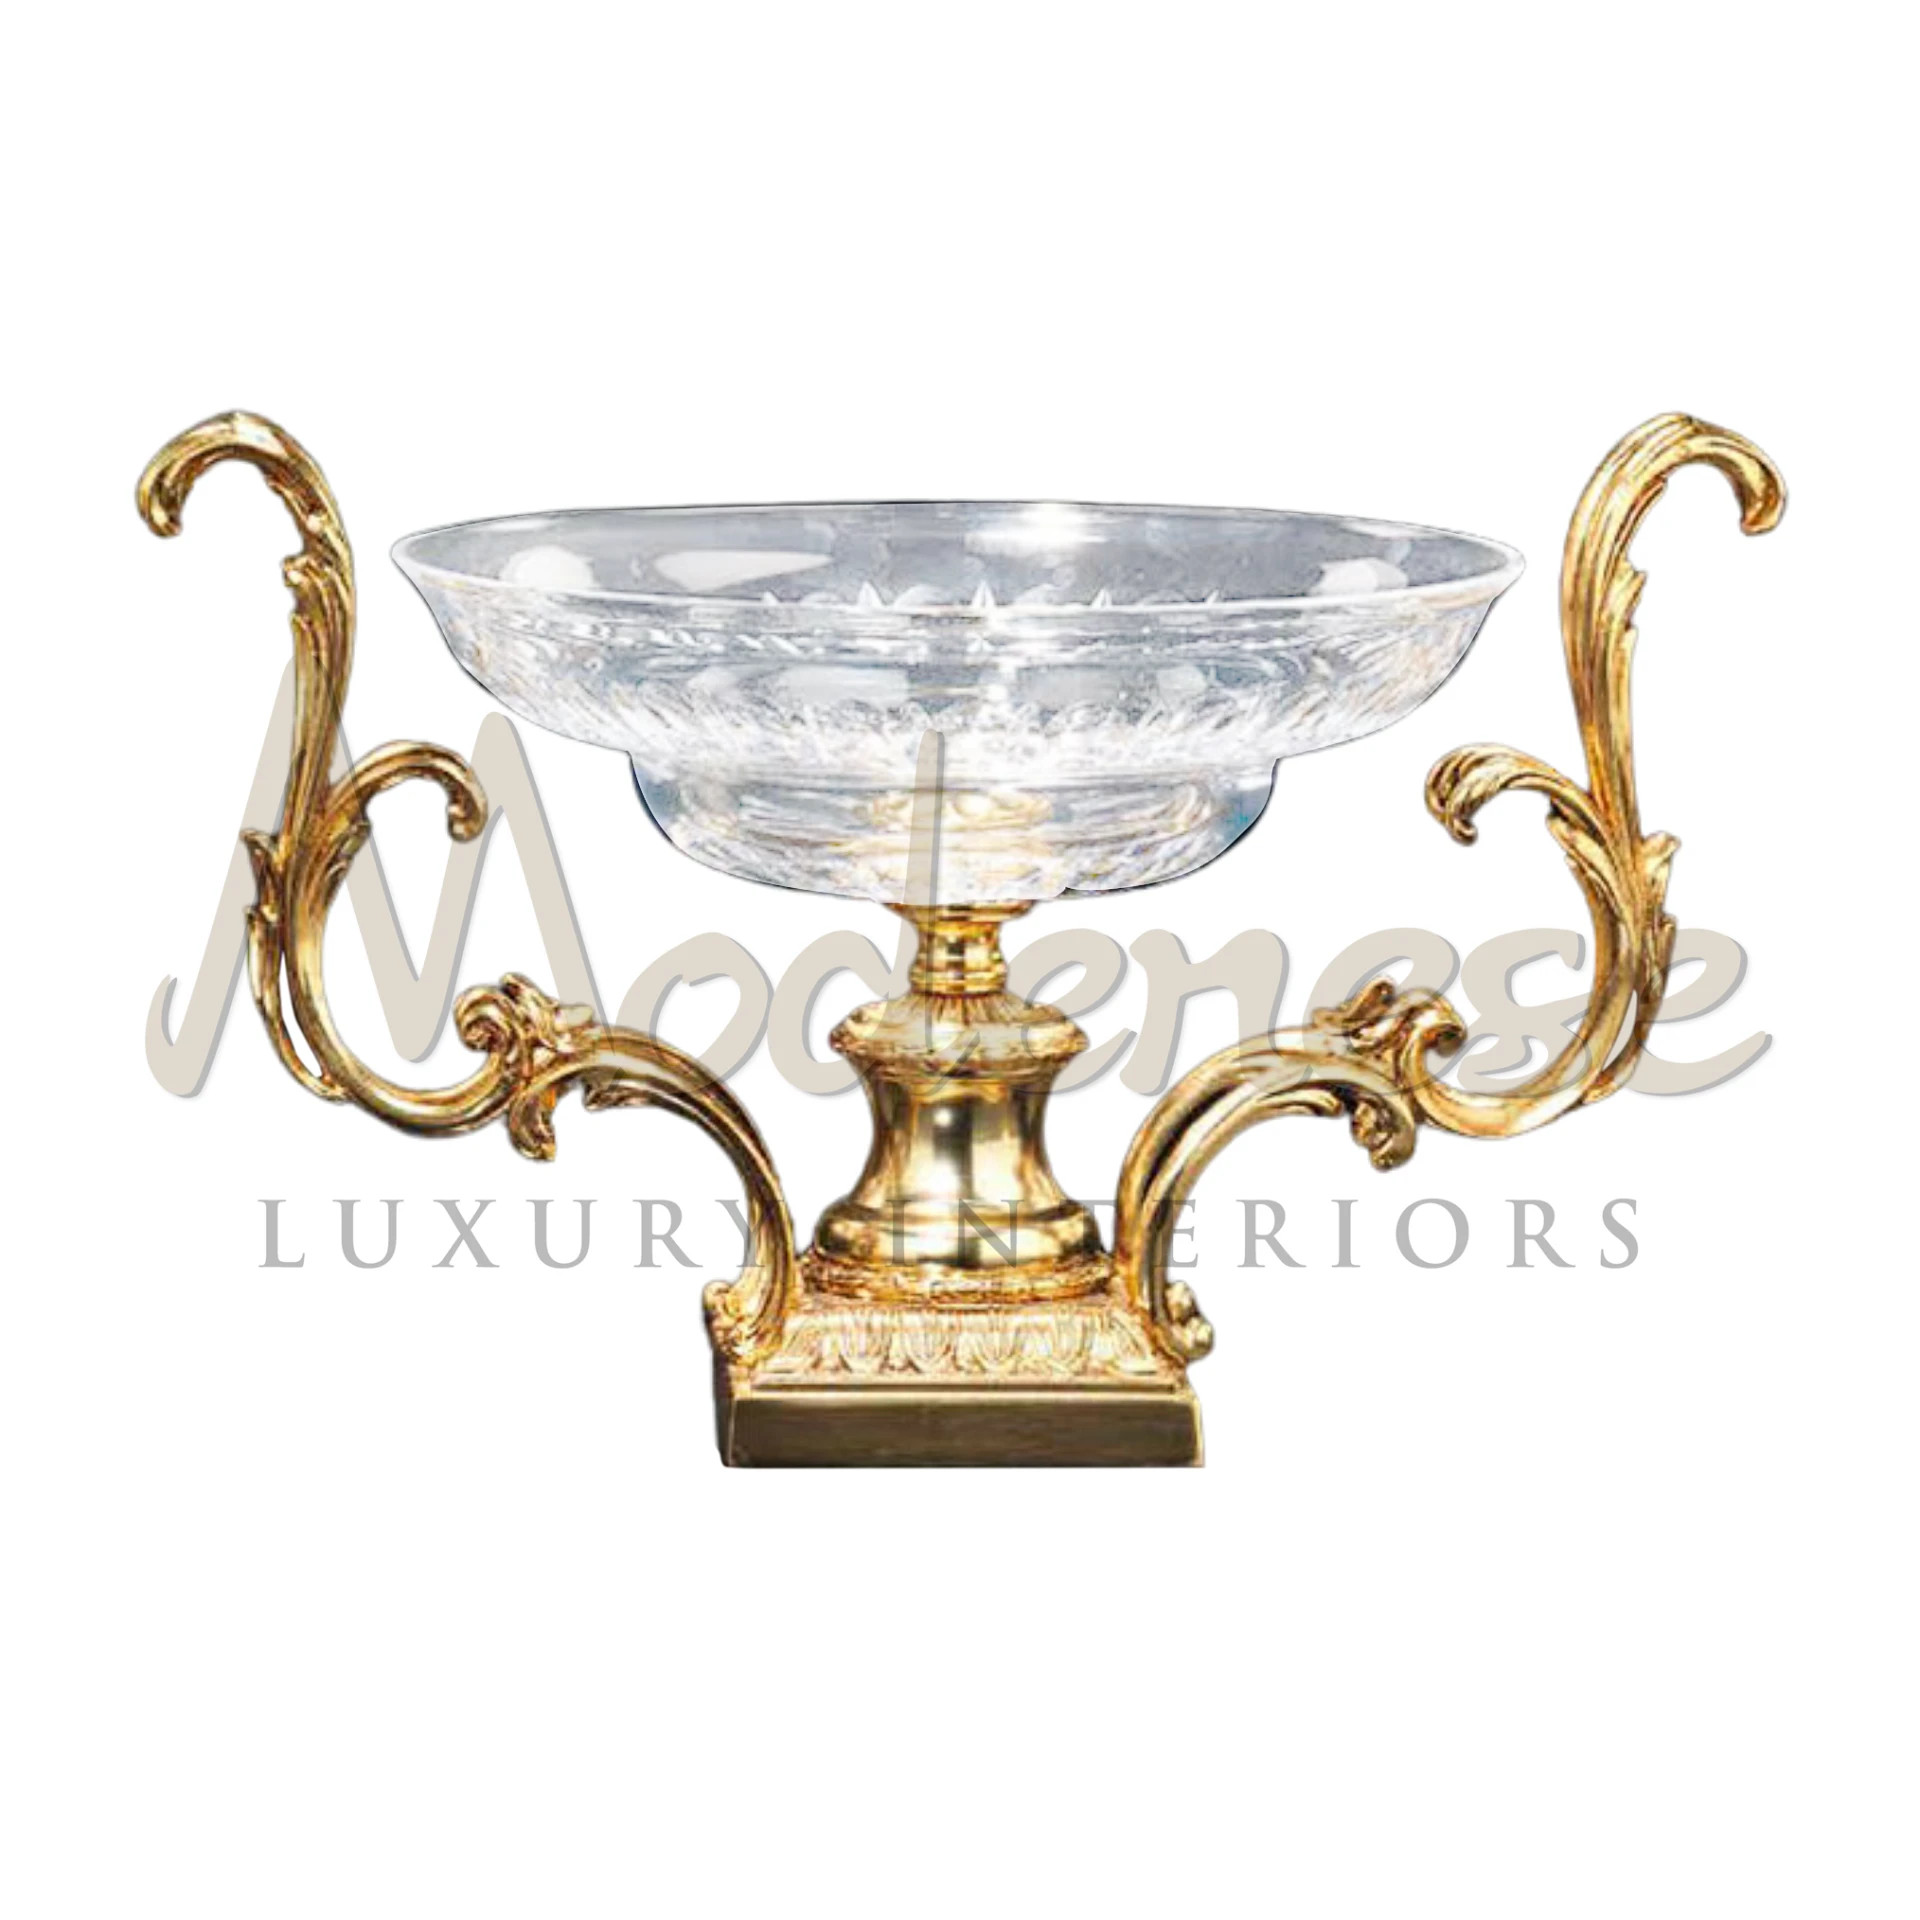 Luxury Gold Two Handled Bowl, ideal as a decorative centerpiece or functional serving dish, embodying elegance and luxury.